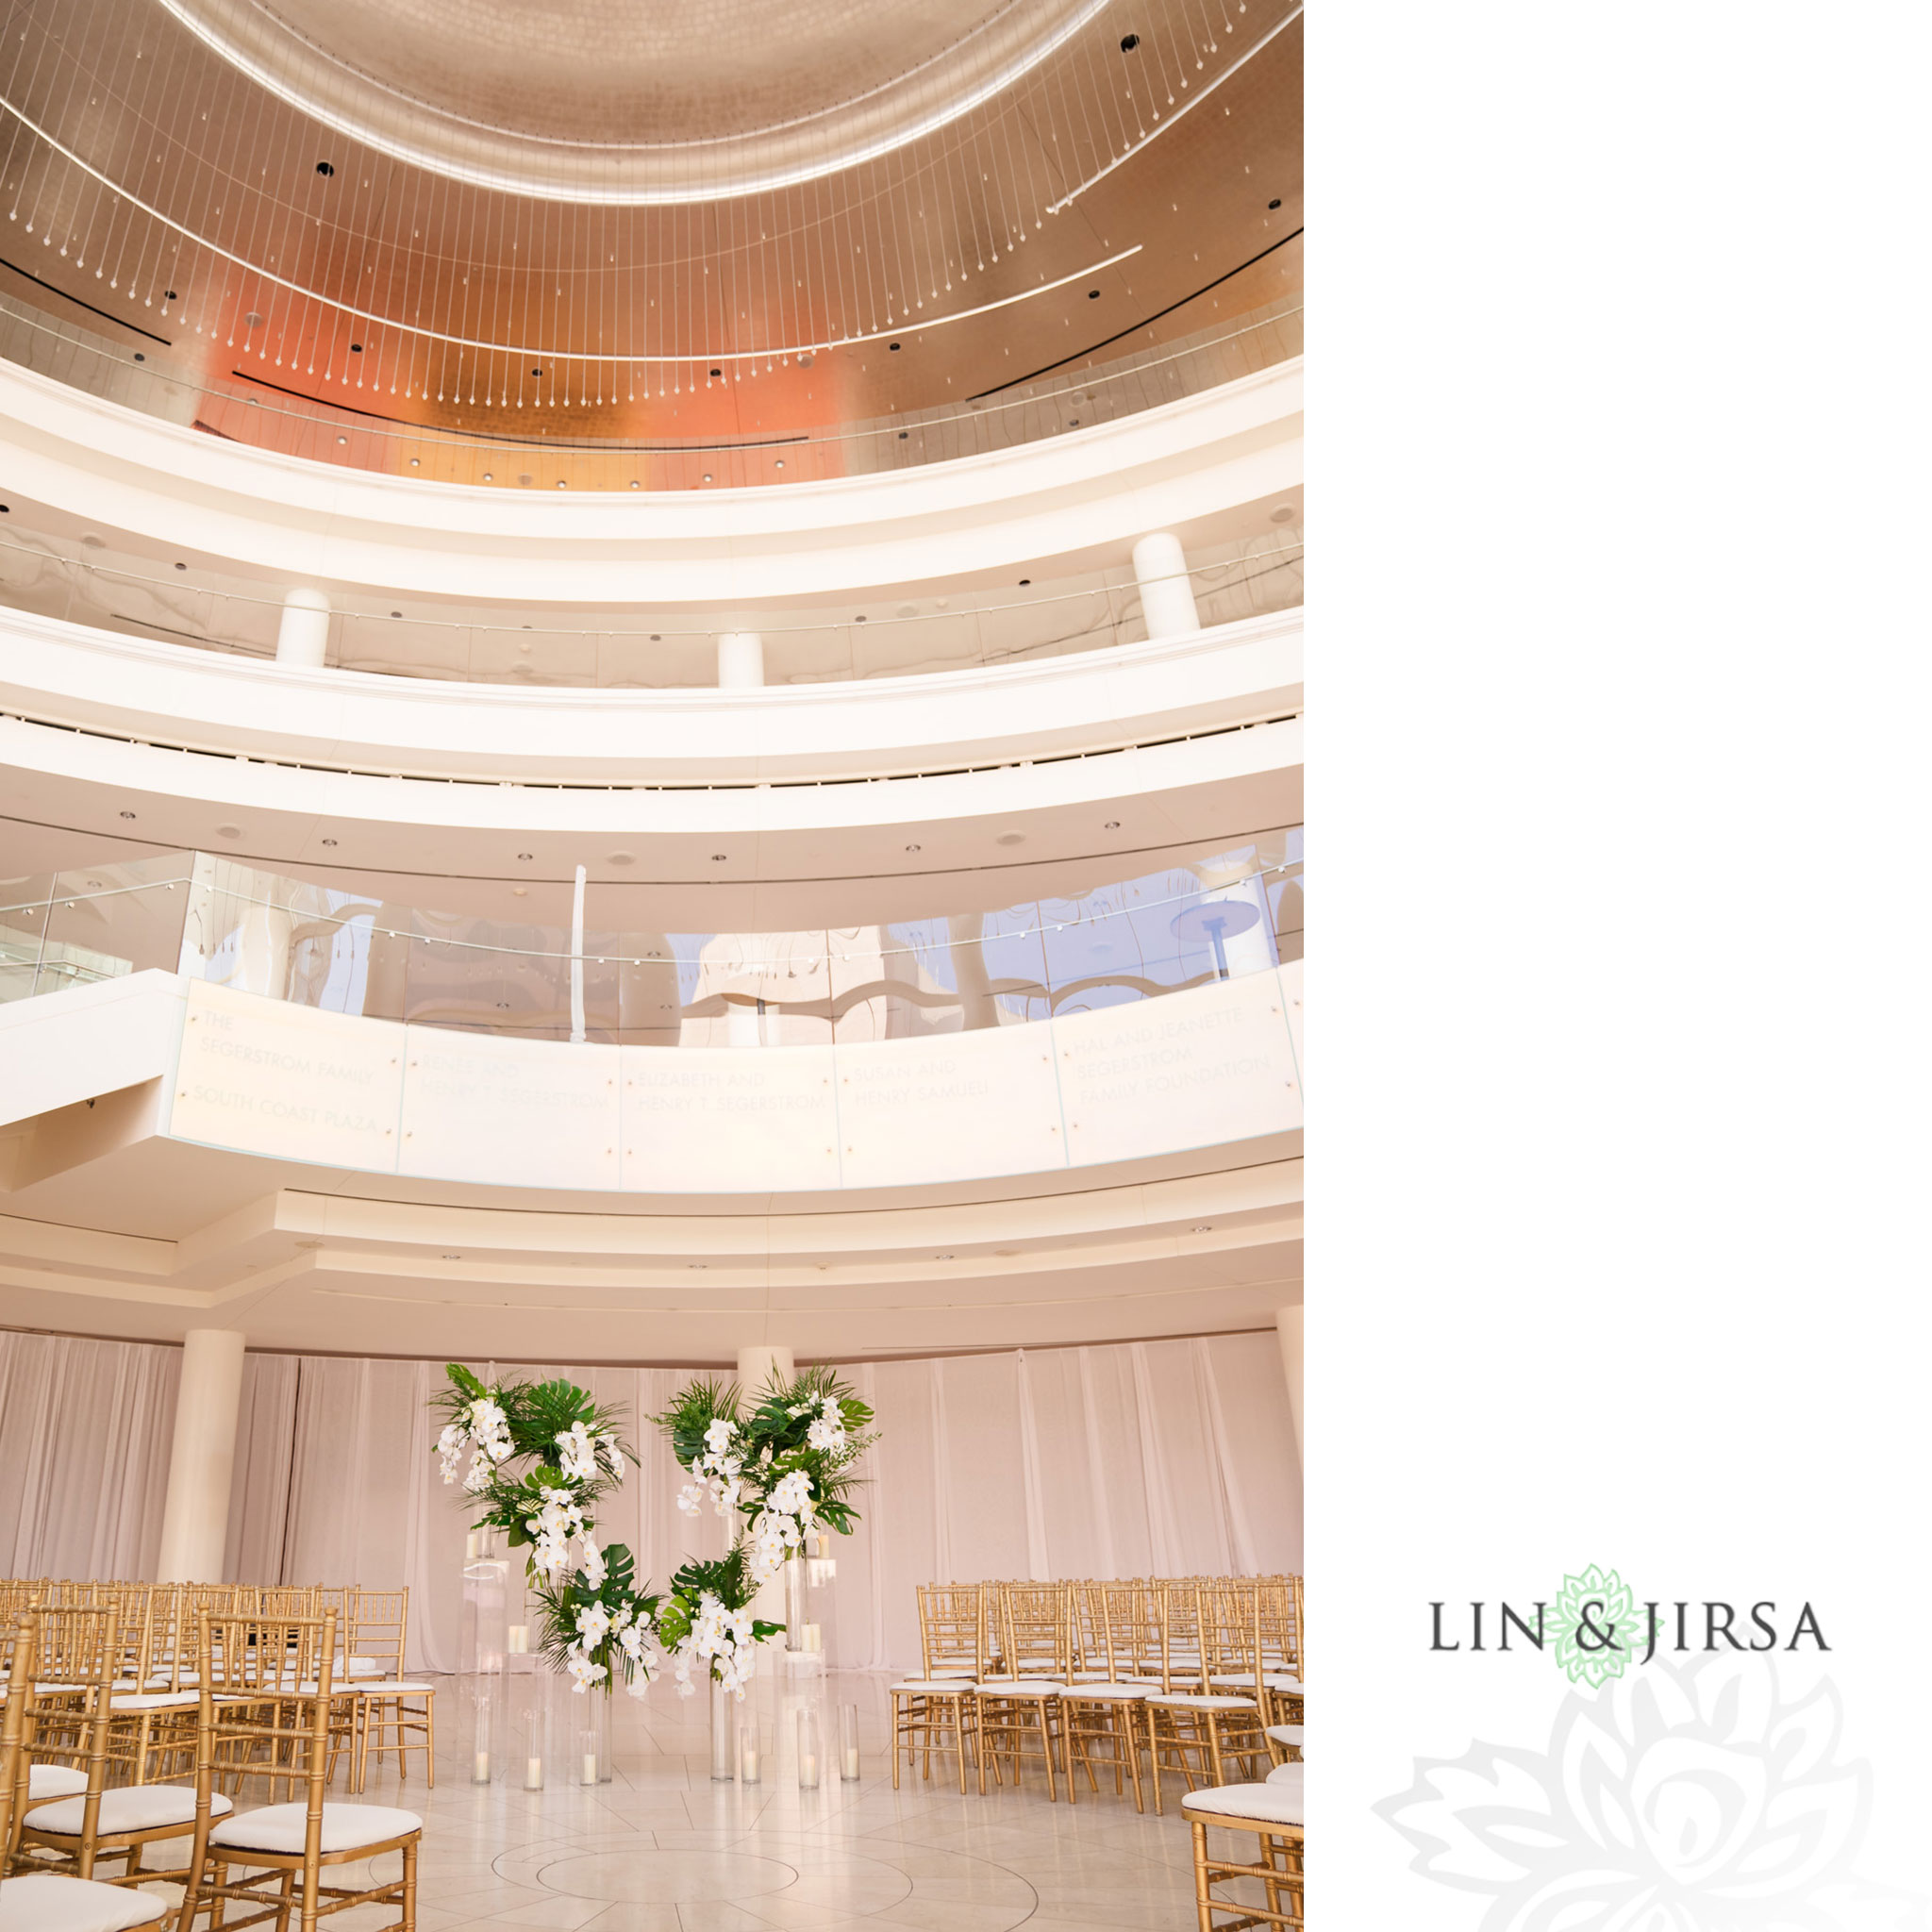 20 segerstrom center for the arts costa mesa wedding photography